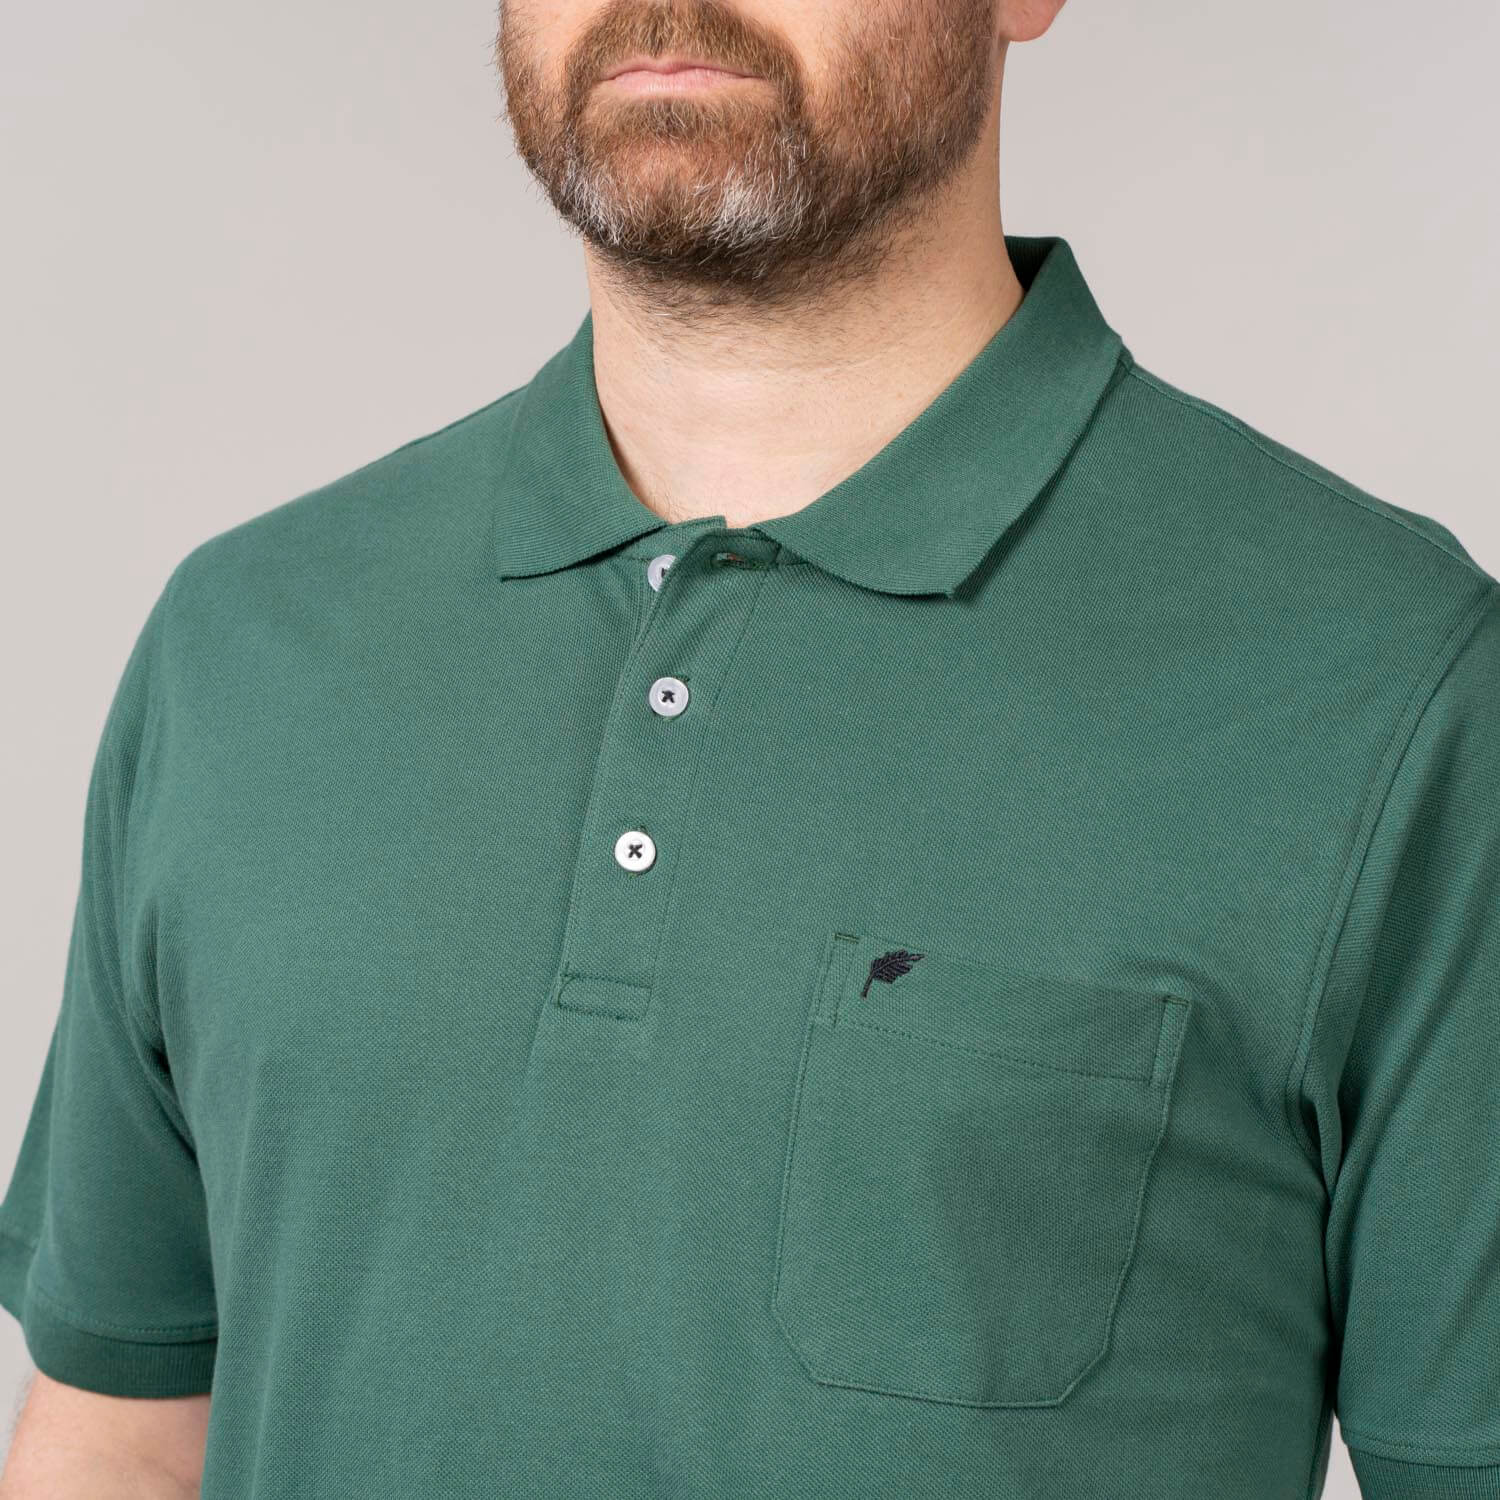 Yeats Niels Short-sleeve Polo Field Green 2 Shaws Department Stores